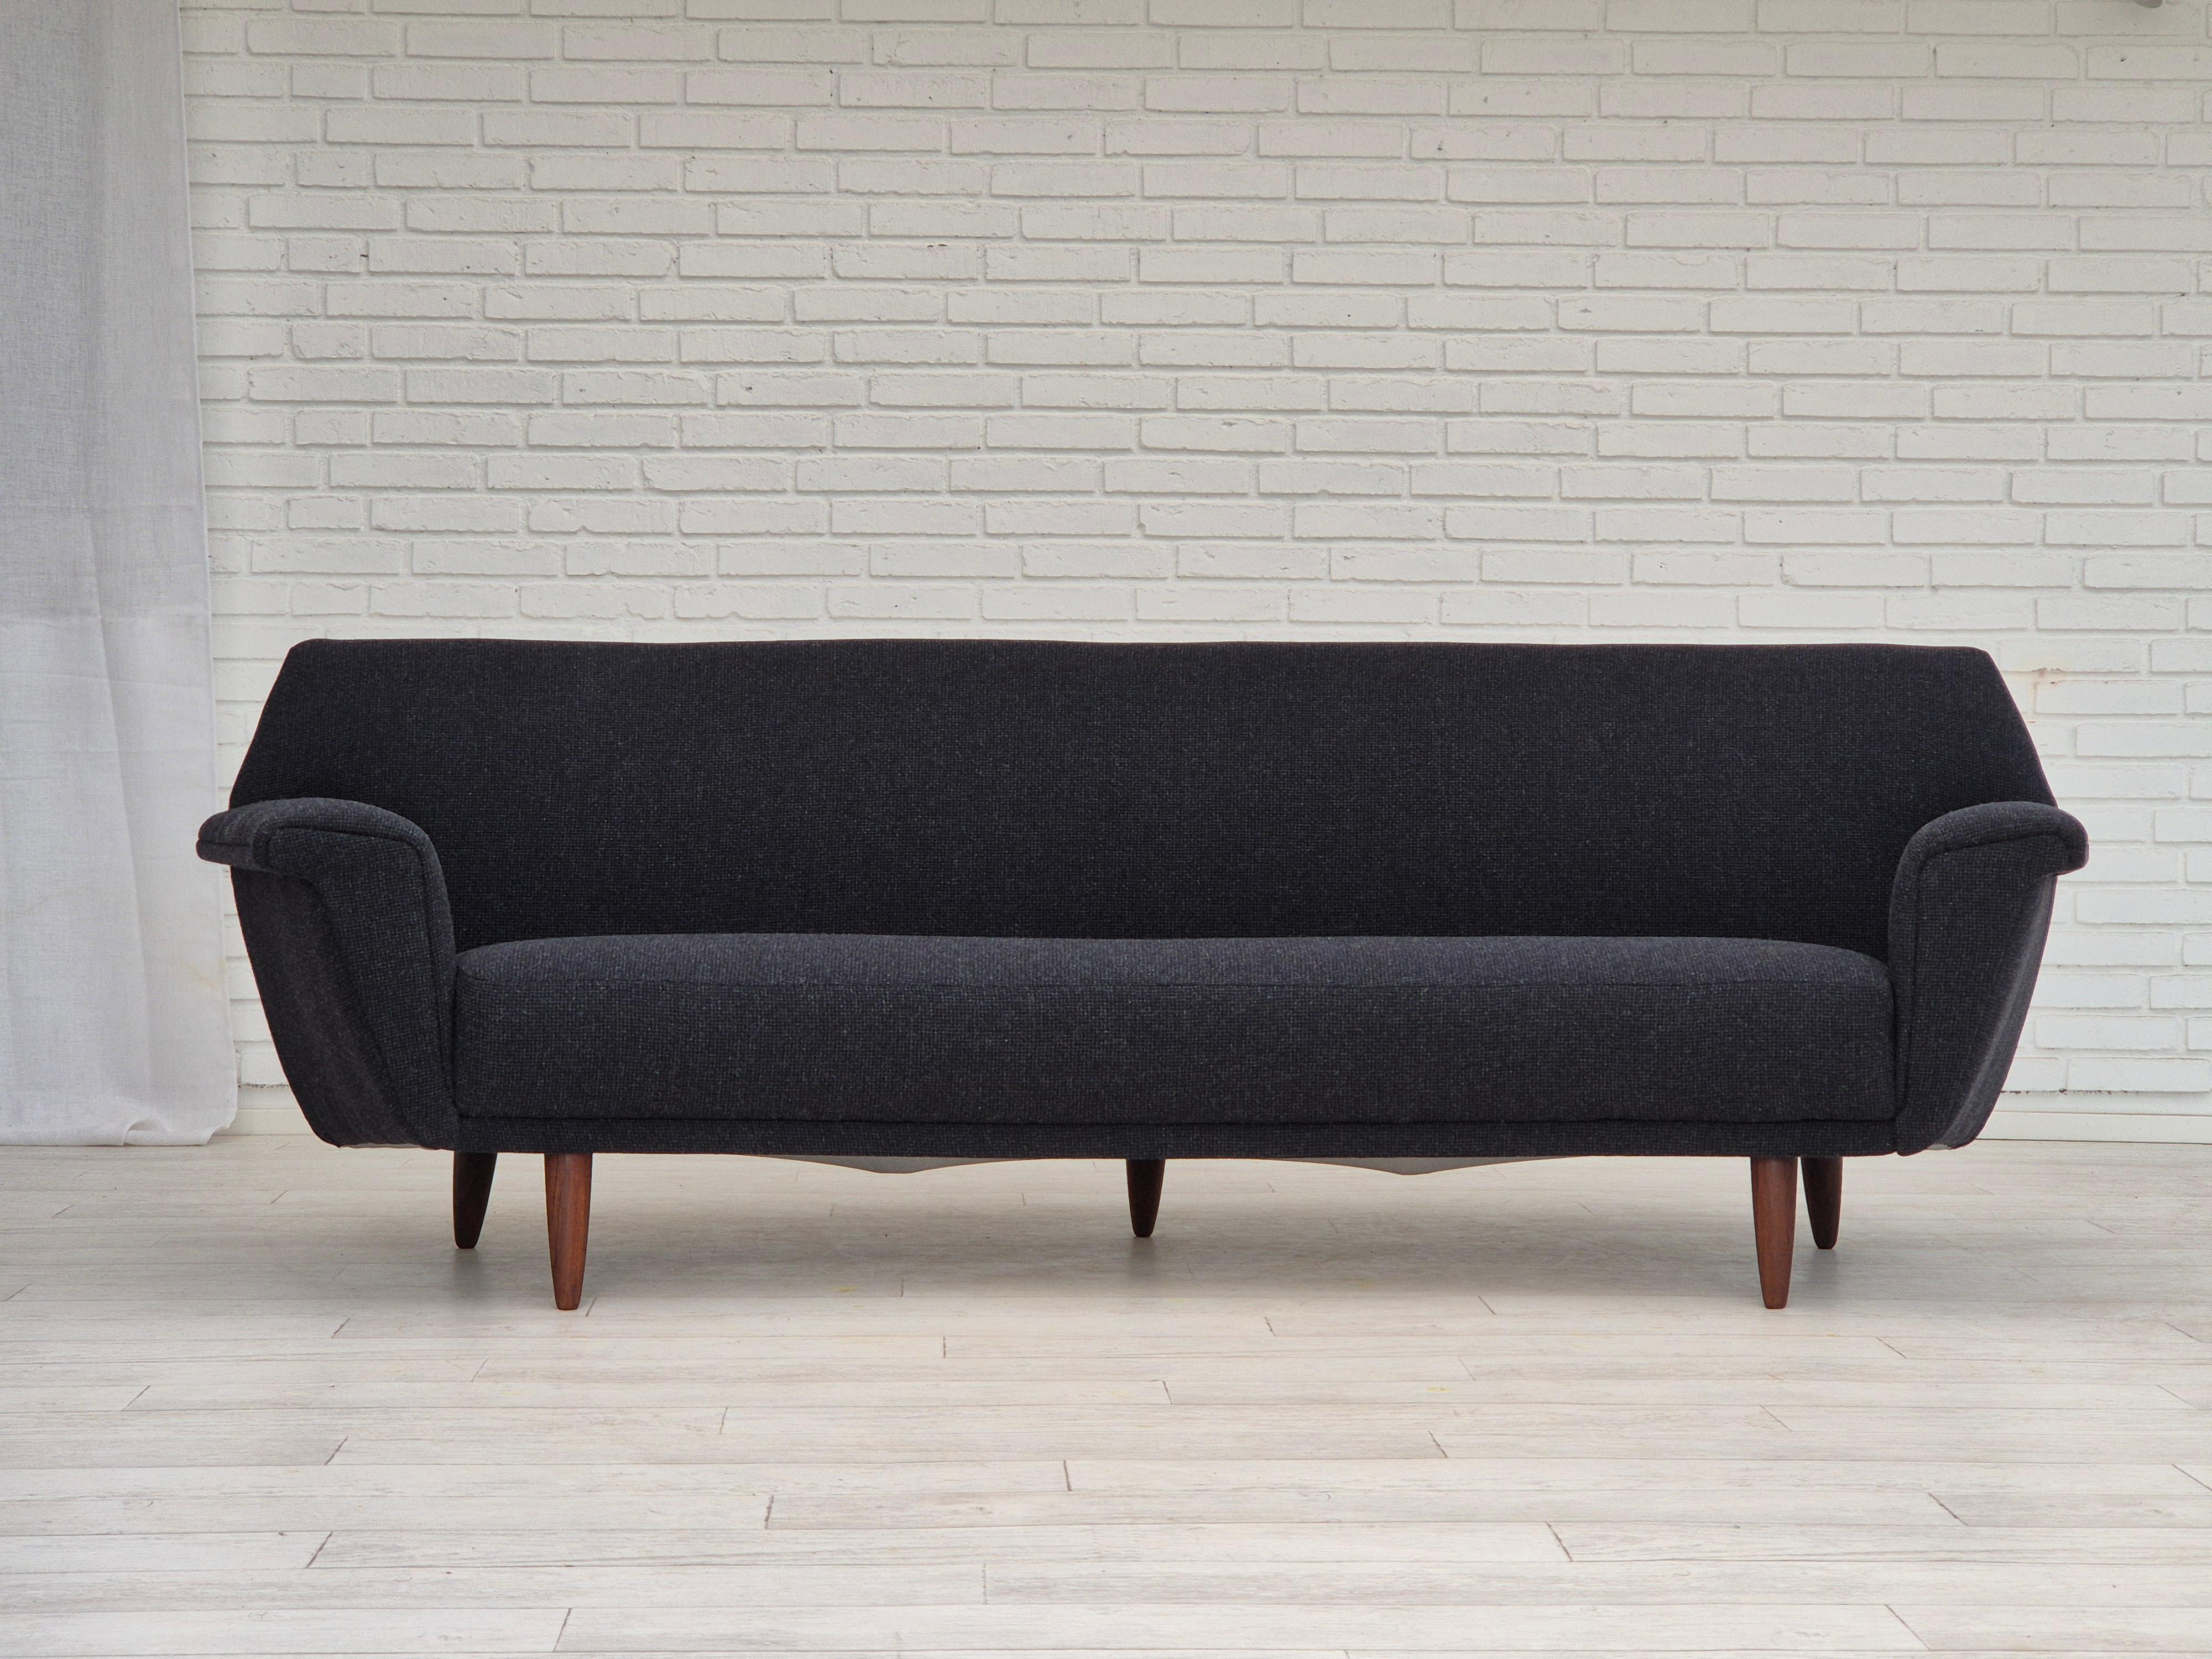 1960s, Danish design by Georg Thams for Vejen Polstermøbelfabrik. Completely renovated, reupholstered 3-seater sofa model 53. Brand new upholstery according to original design. Quality Nevotex charcoal gray furniture wool 